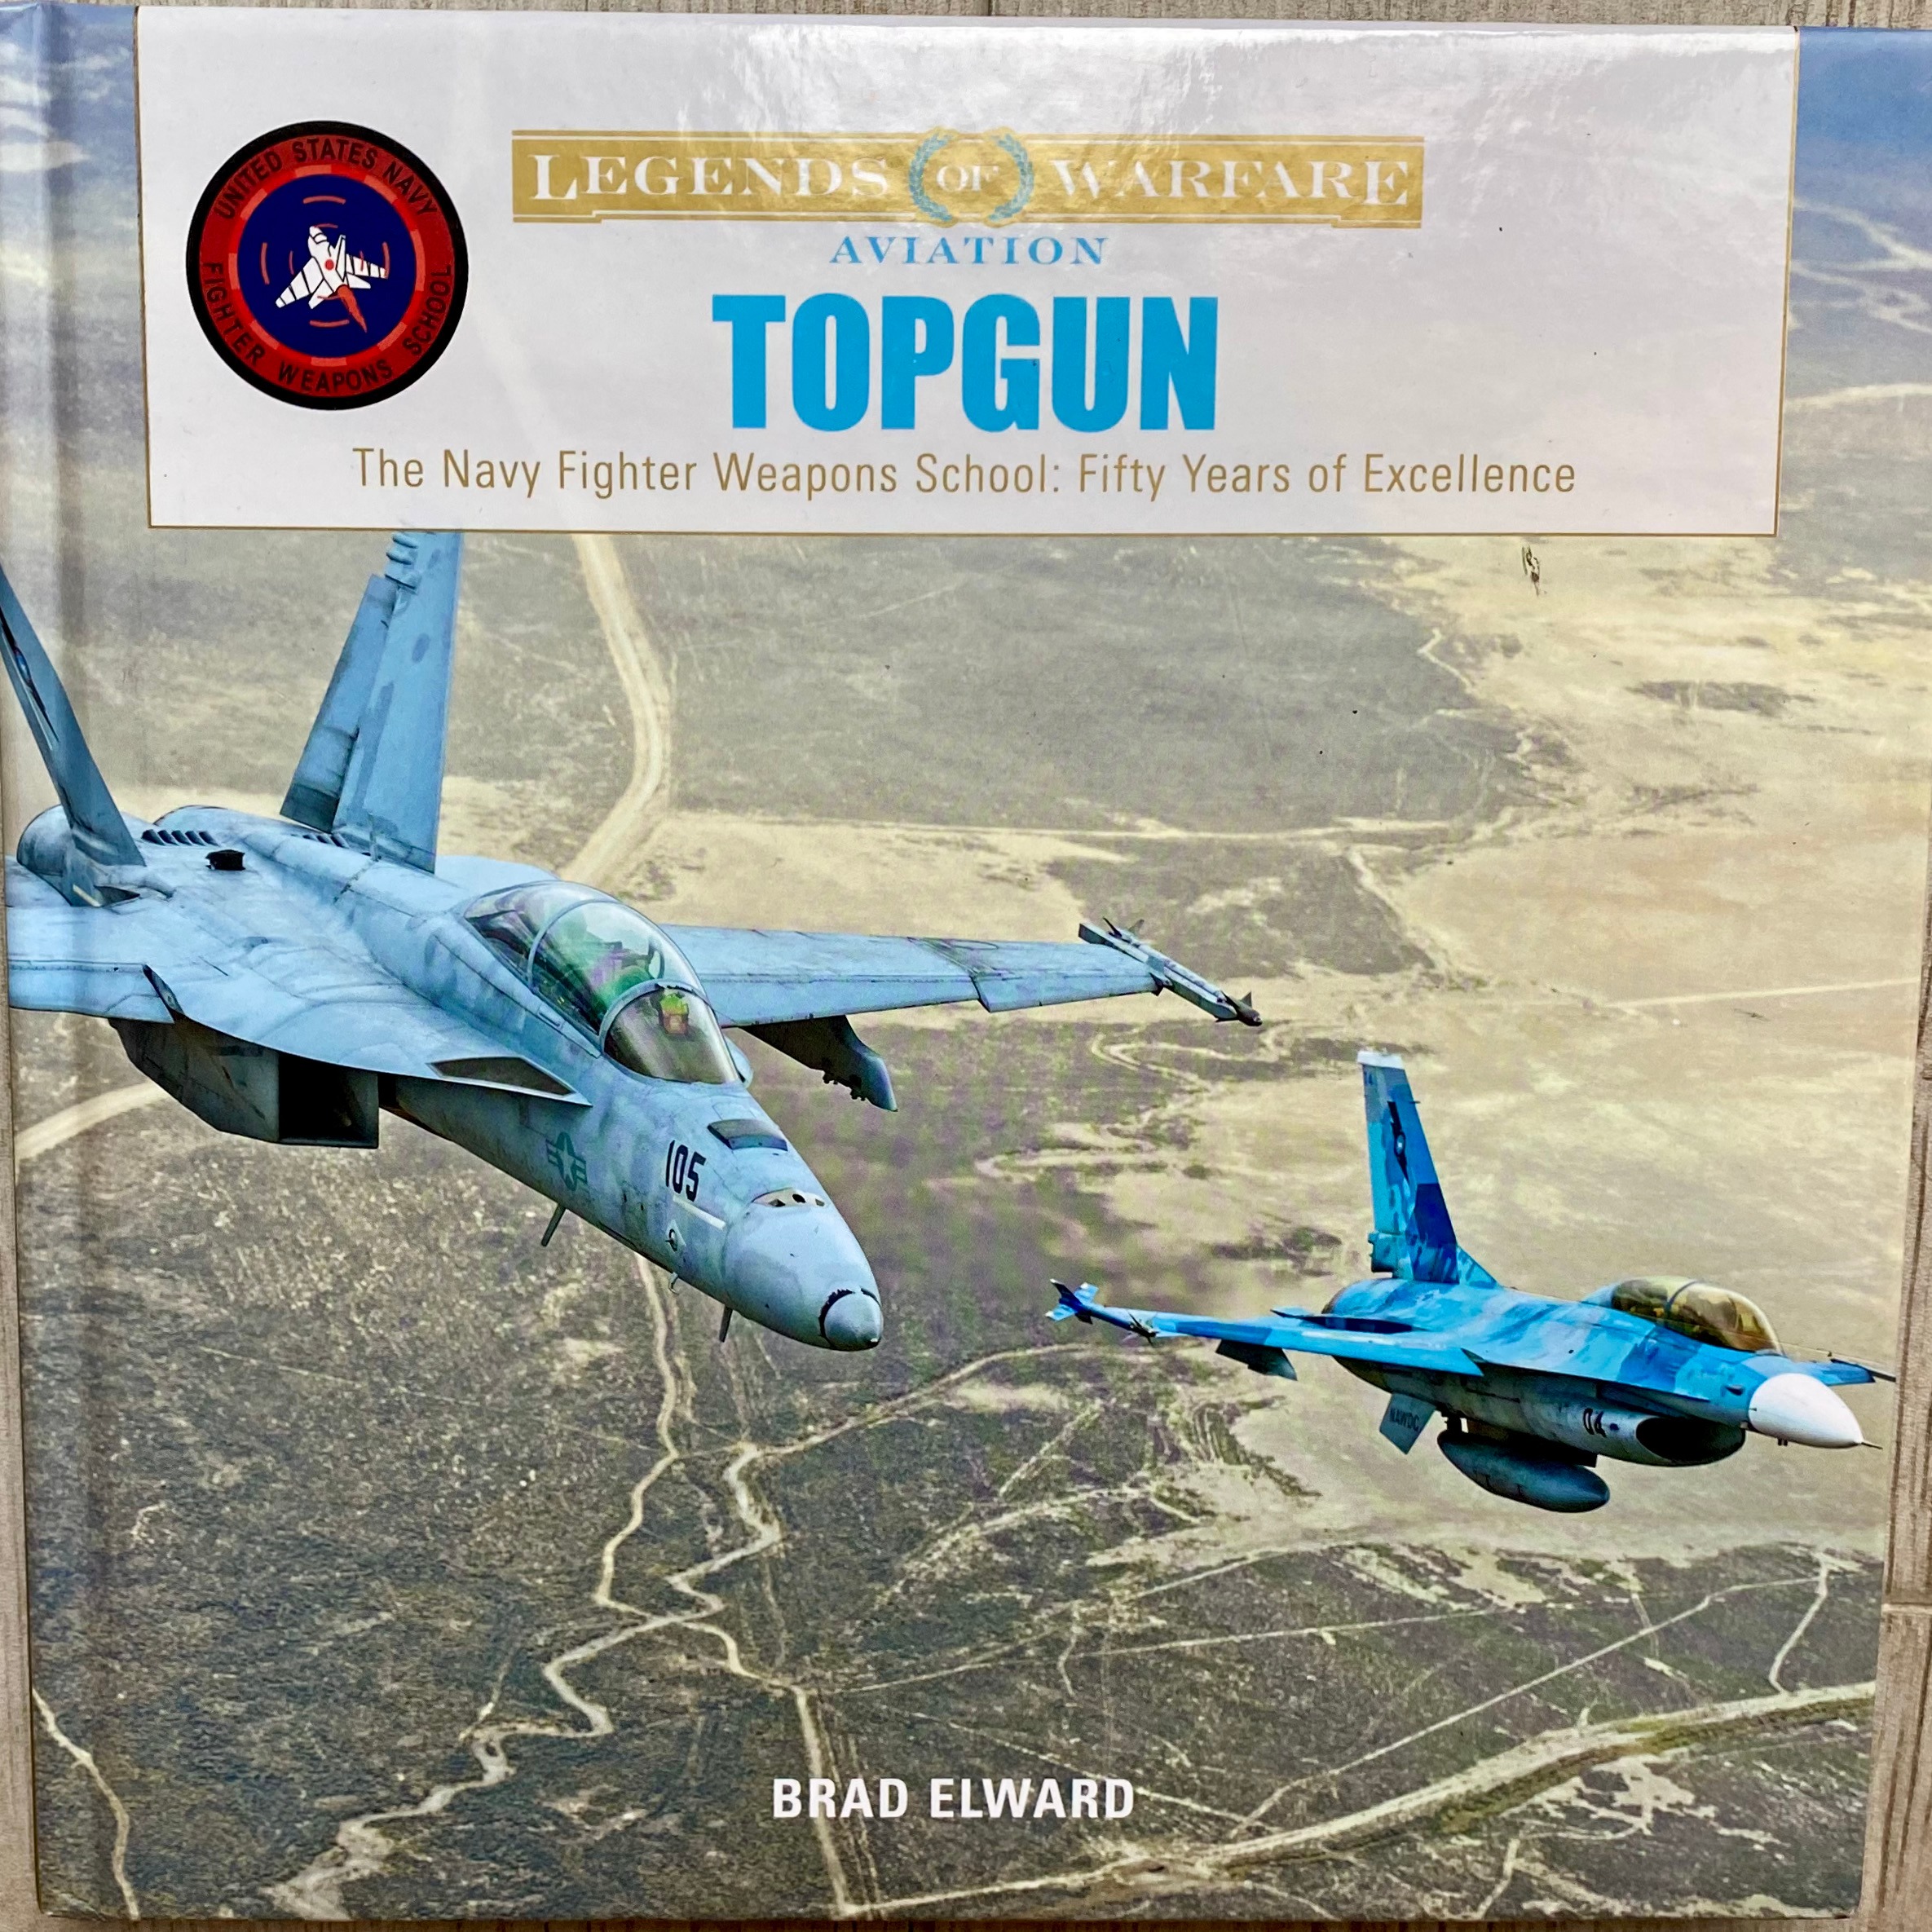 TOPGUN: 50 Years of Excellence with Brad Elward